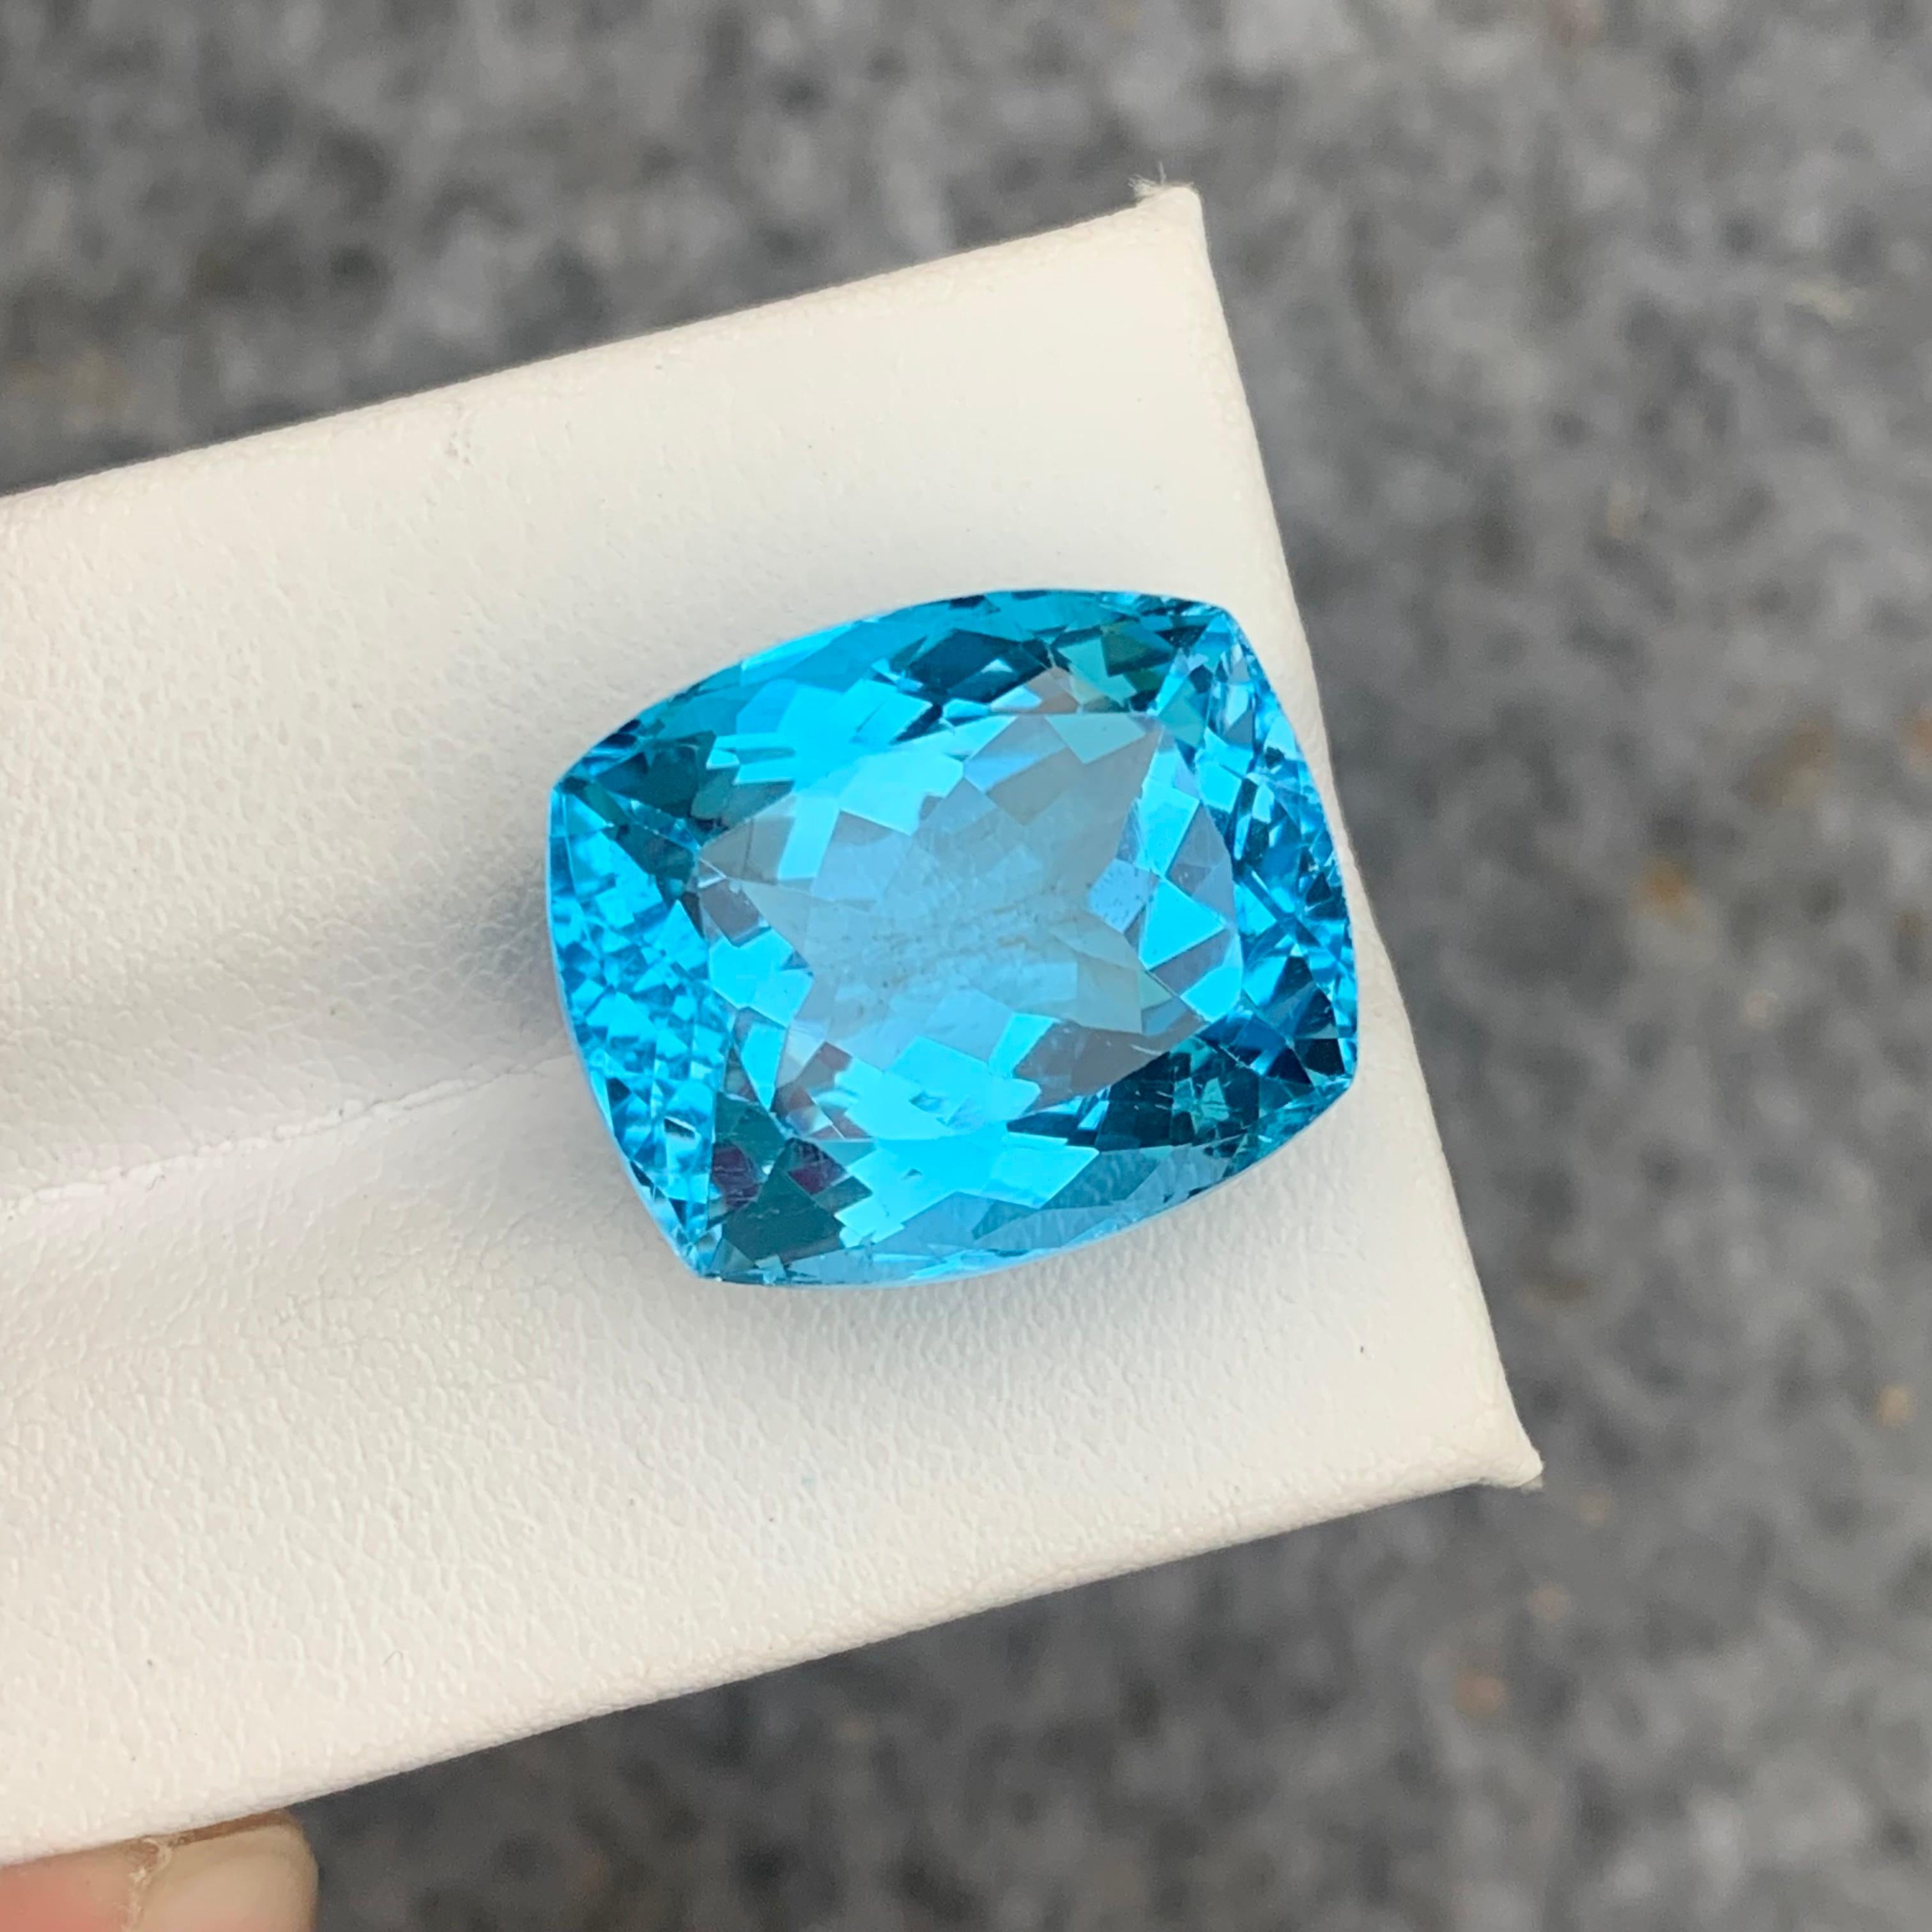 Gorgeous 31.10 Carat Loose Blue Topaz from Brazil Long Cushion Cut for Jewelry For Sale 2